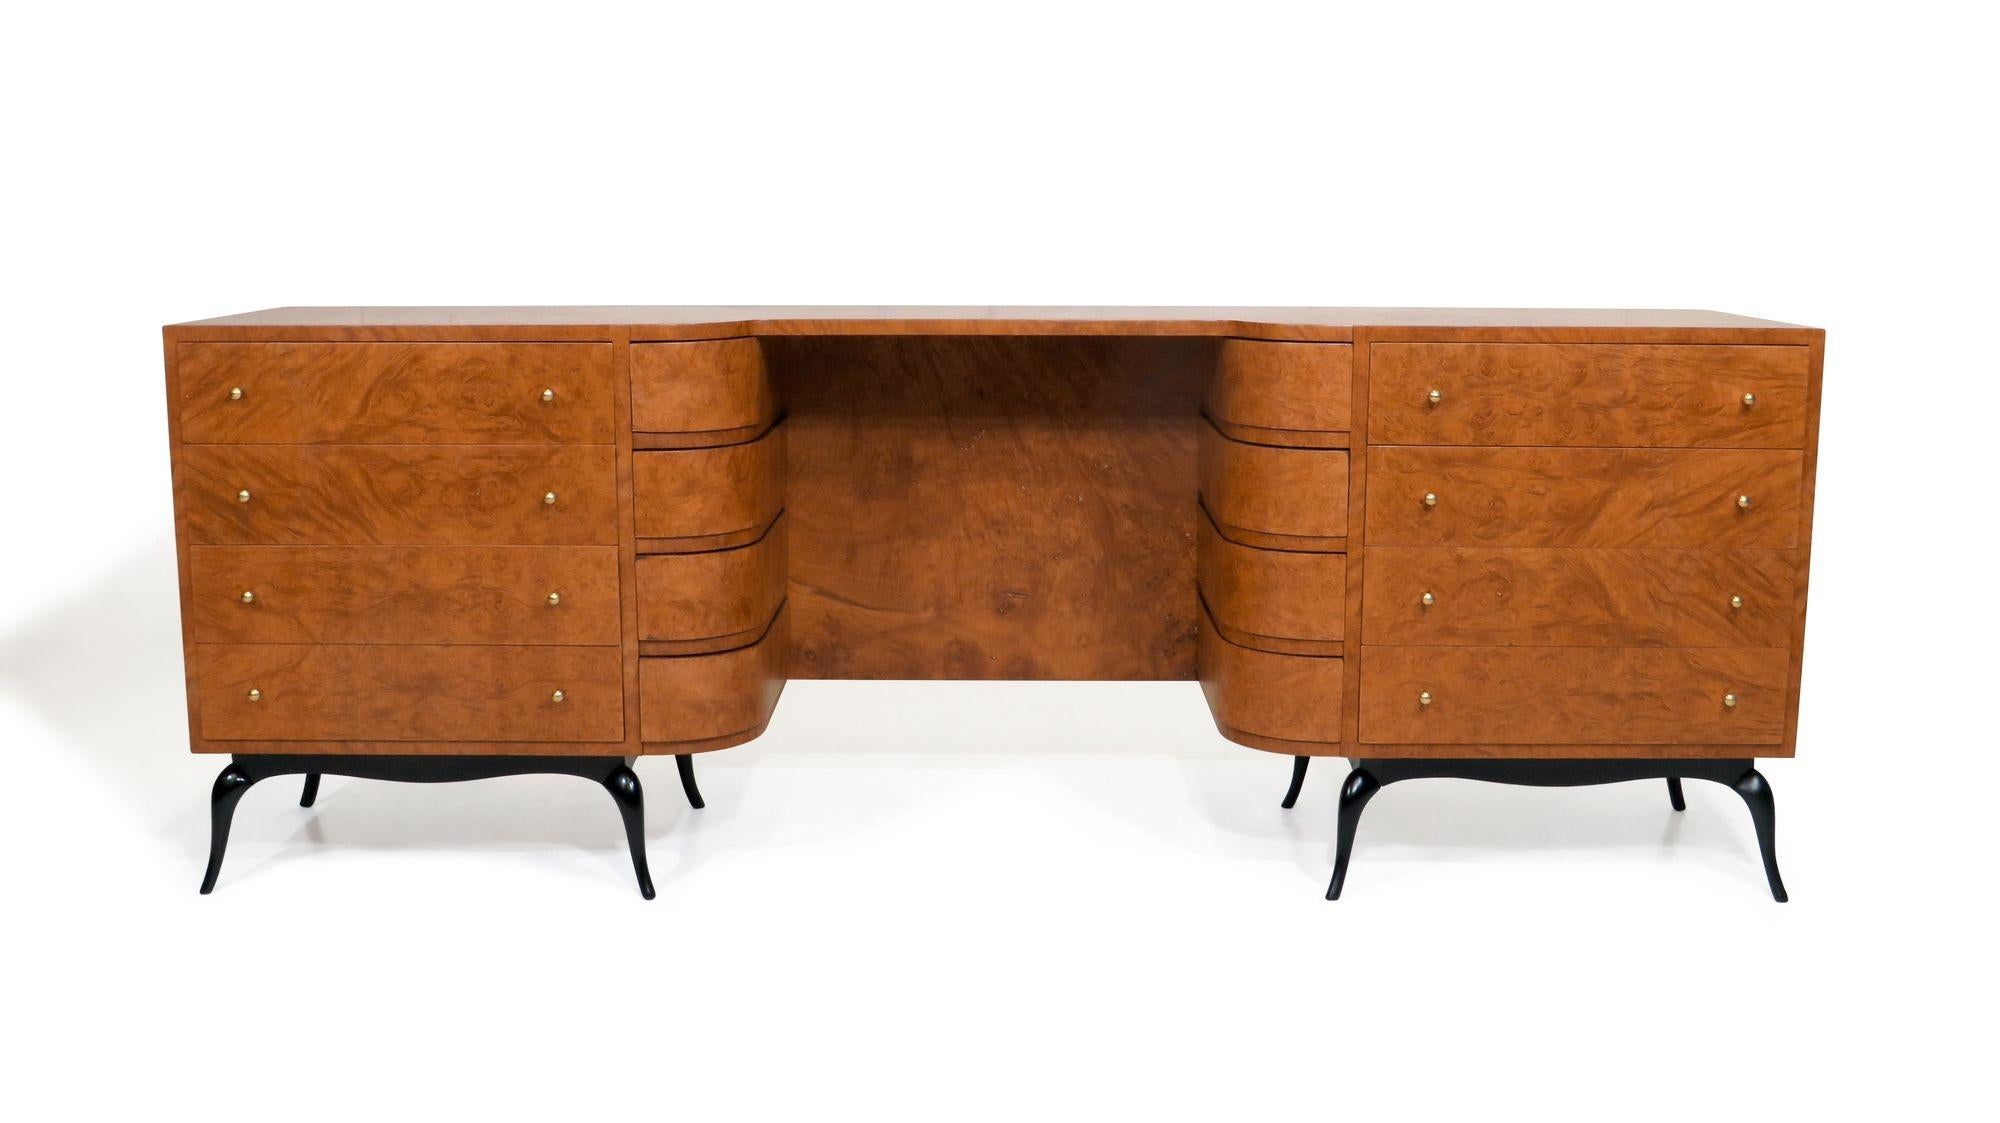 Stunning Giuseppe Scapinelli burled wood vanity dresser, 1958, Brazil. Expertly crafted with burled wood, eight drawers with brass pulls, open space in center and eight curved front drawers on either side. Raised on sculpted black lacquered legs. 
W